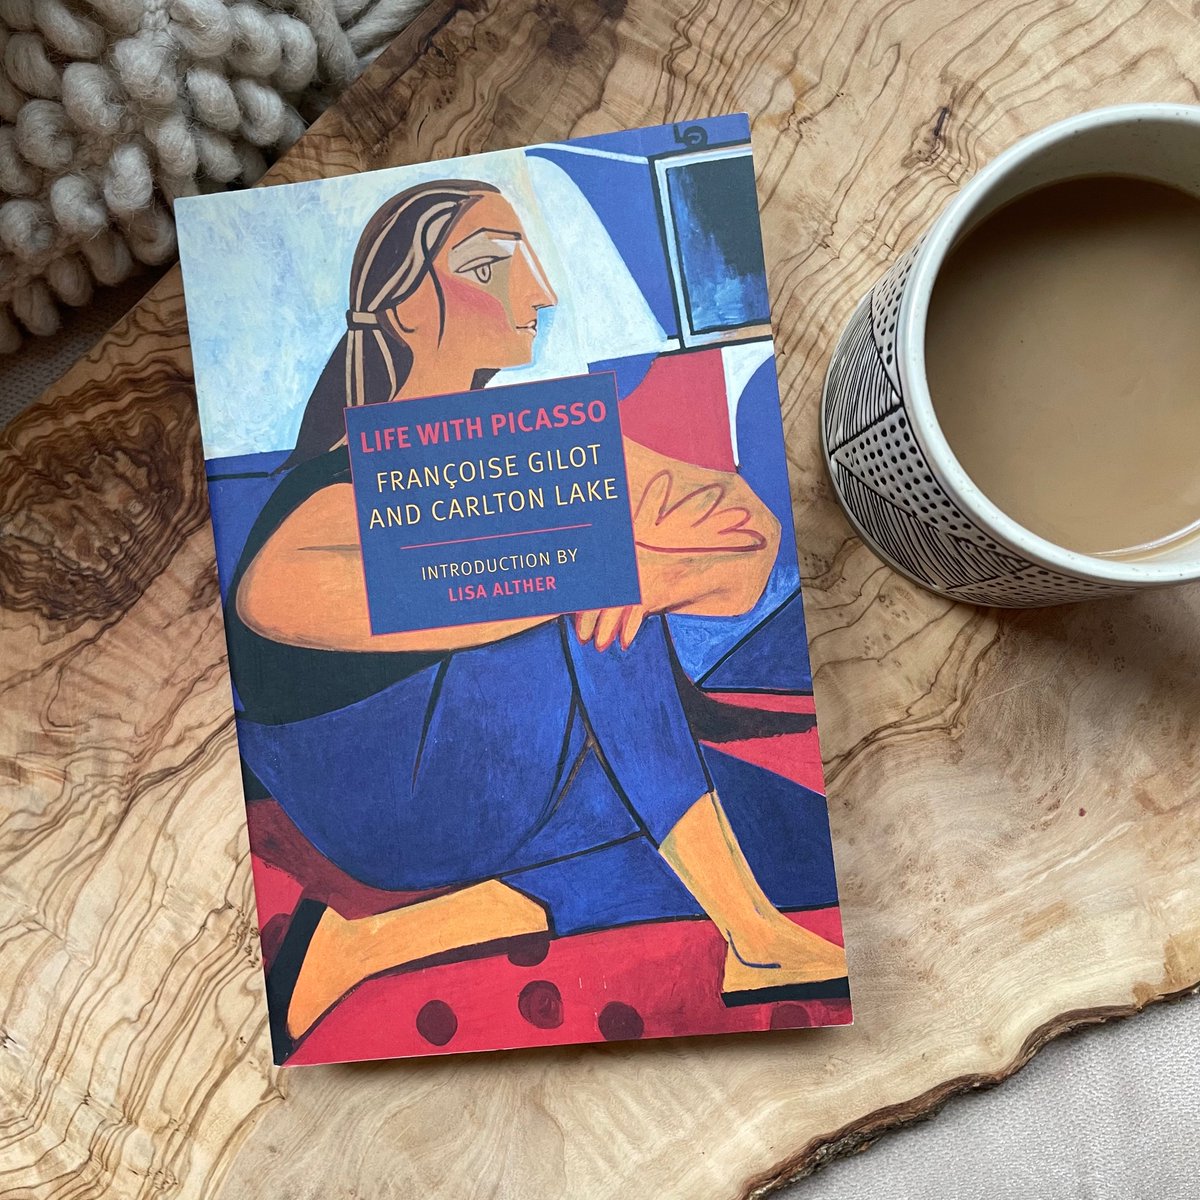 “The most striking thing, though, was a glowing canvas by Matisse, a still life of 1912, with a bowl of oranges on a pink tablecloth against a light ultramarine & bright pink background […] I couldn’t resist saying, “Oh, what a beautiful Matisse!” (p17) #NYRBWomen24